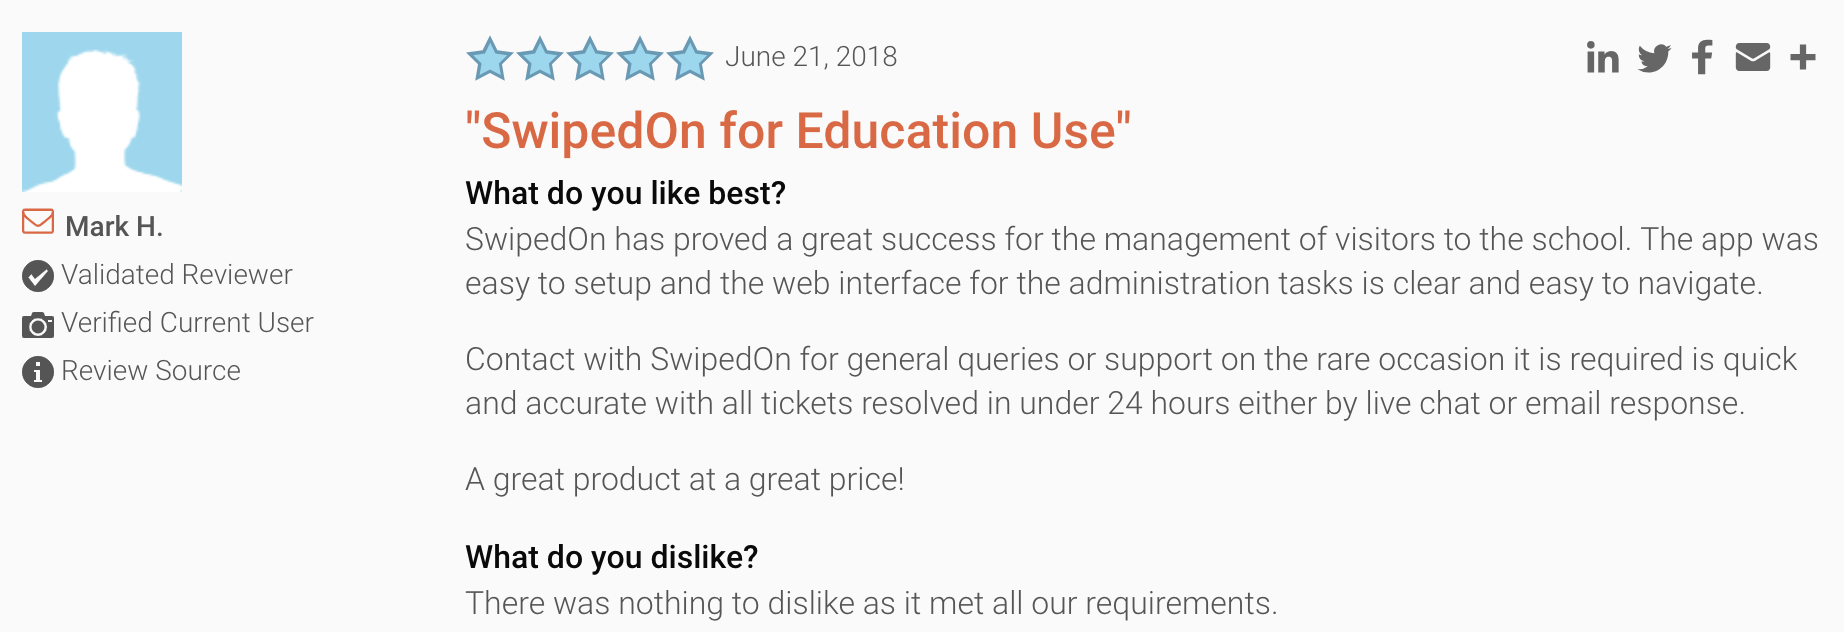 SwipedOn visitor management system for education use